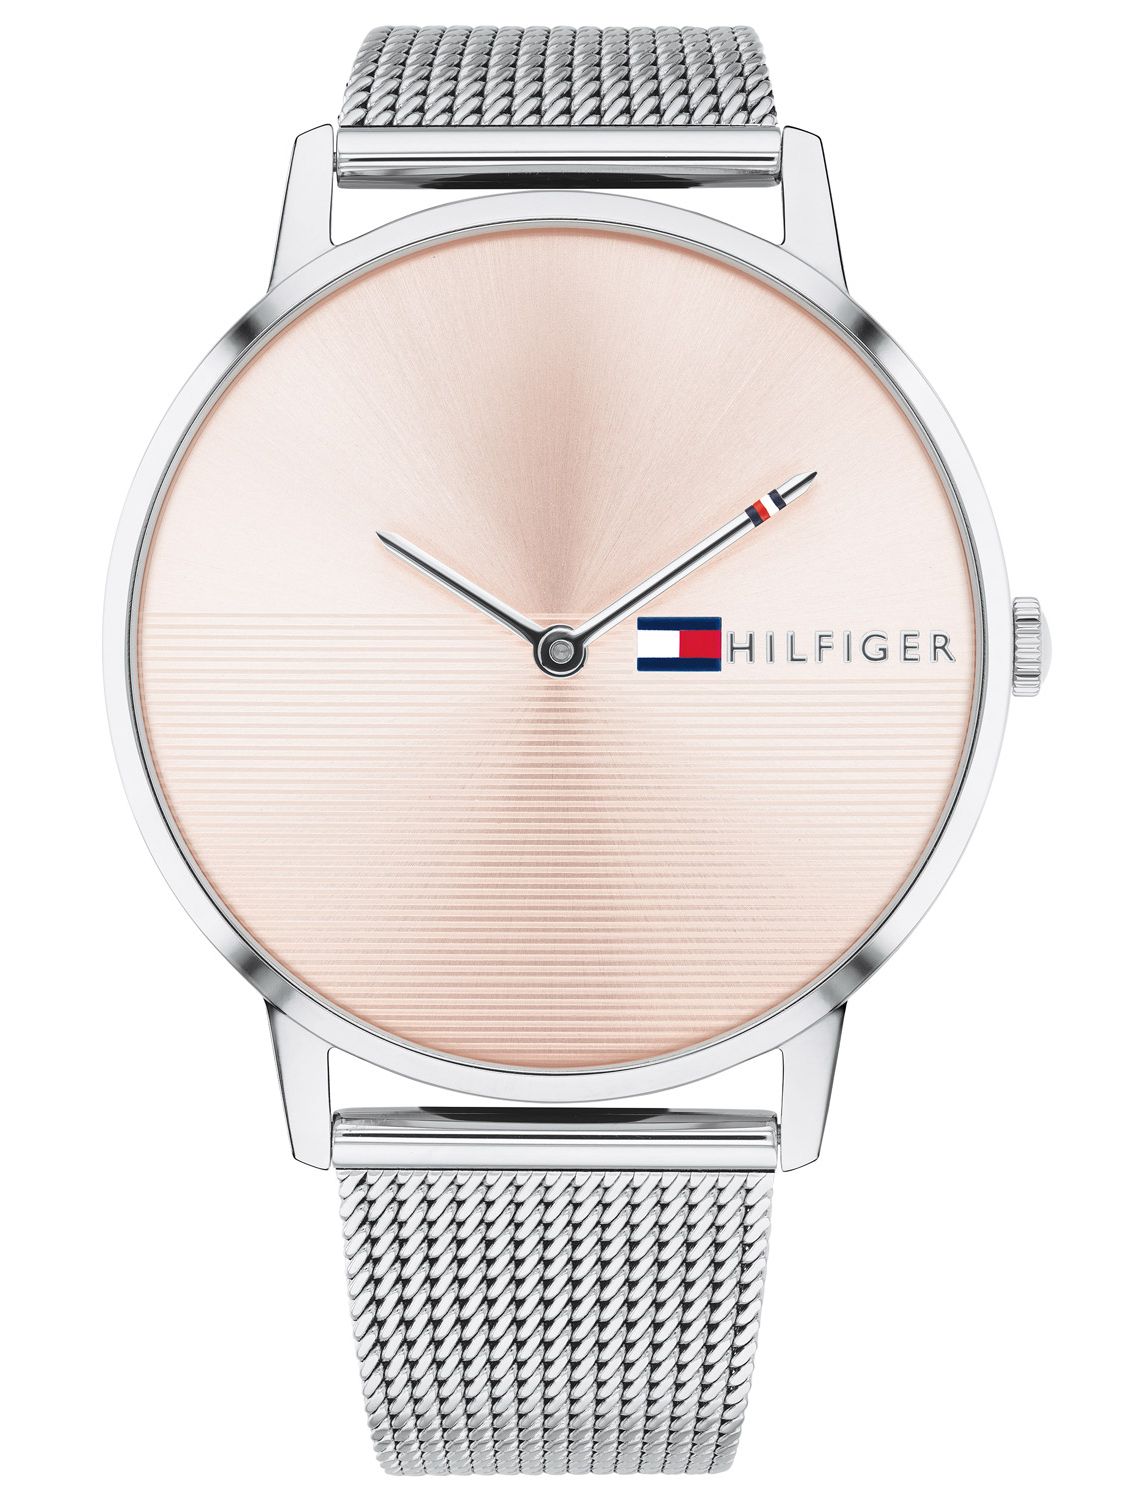 tommy hilfiger watch glass cost Cheaper 